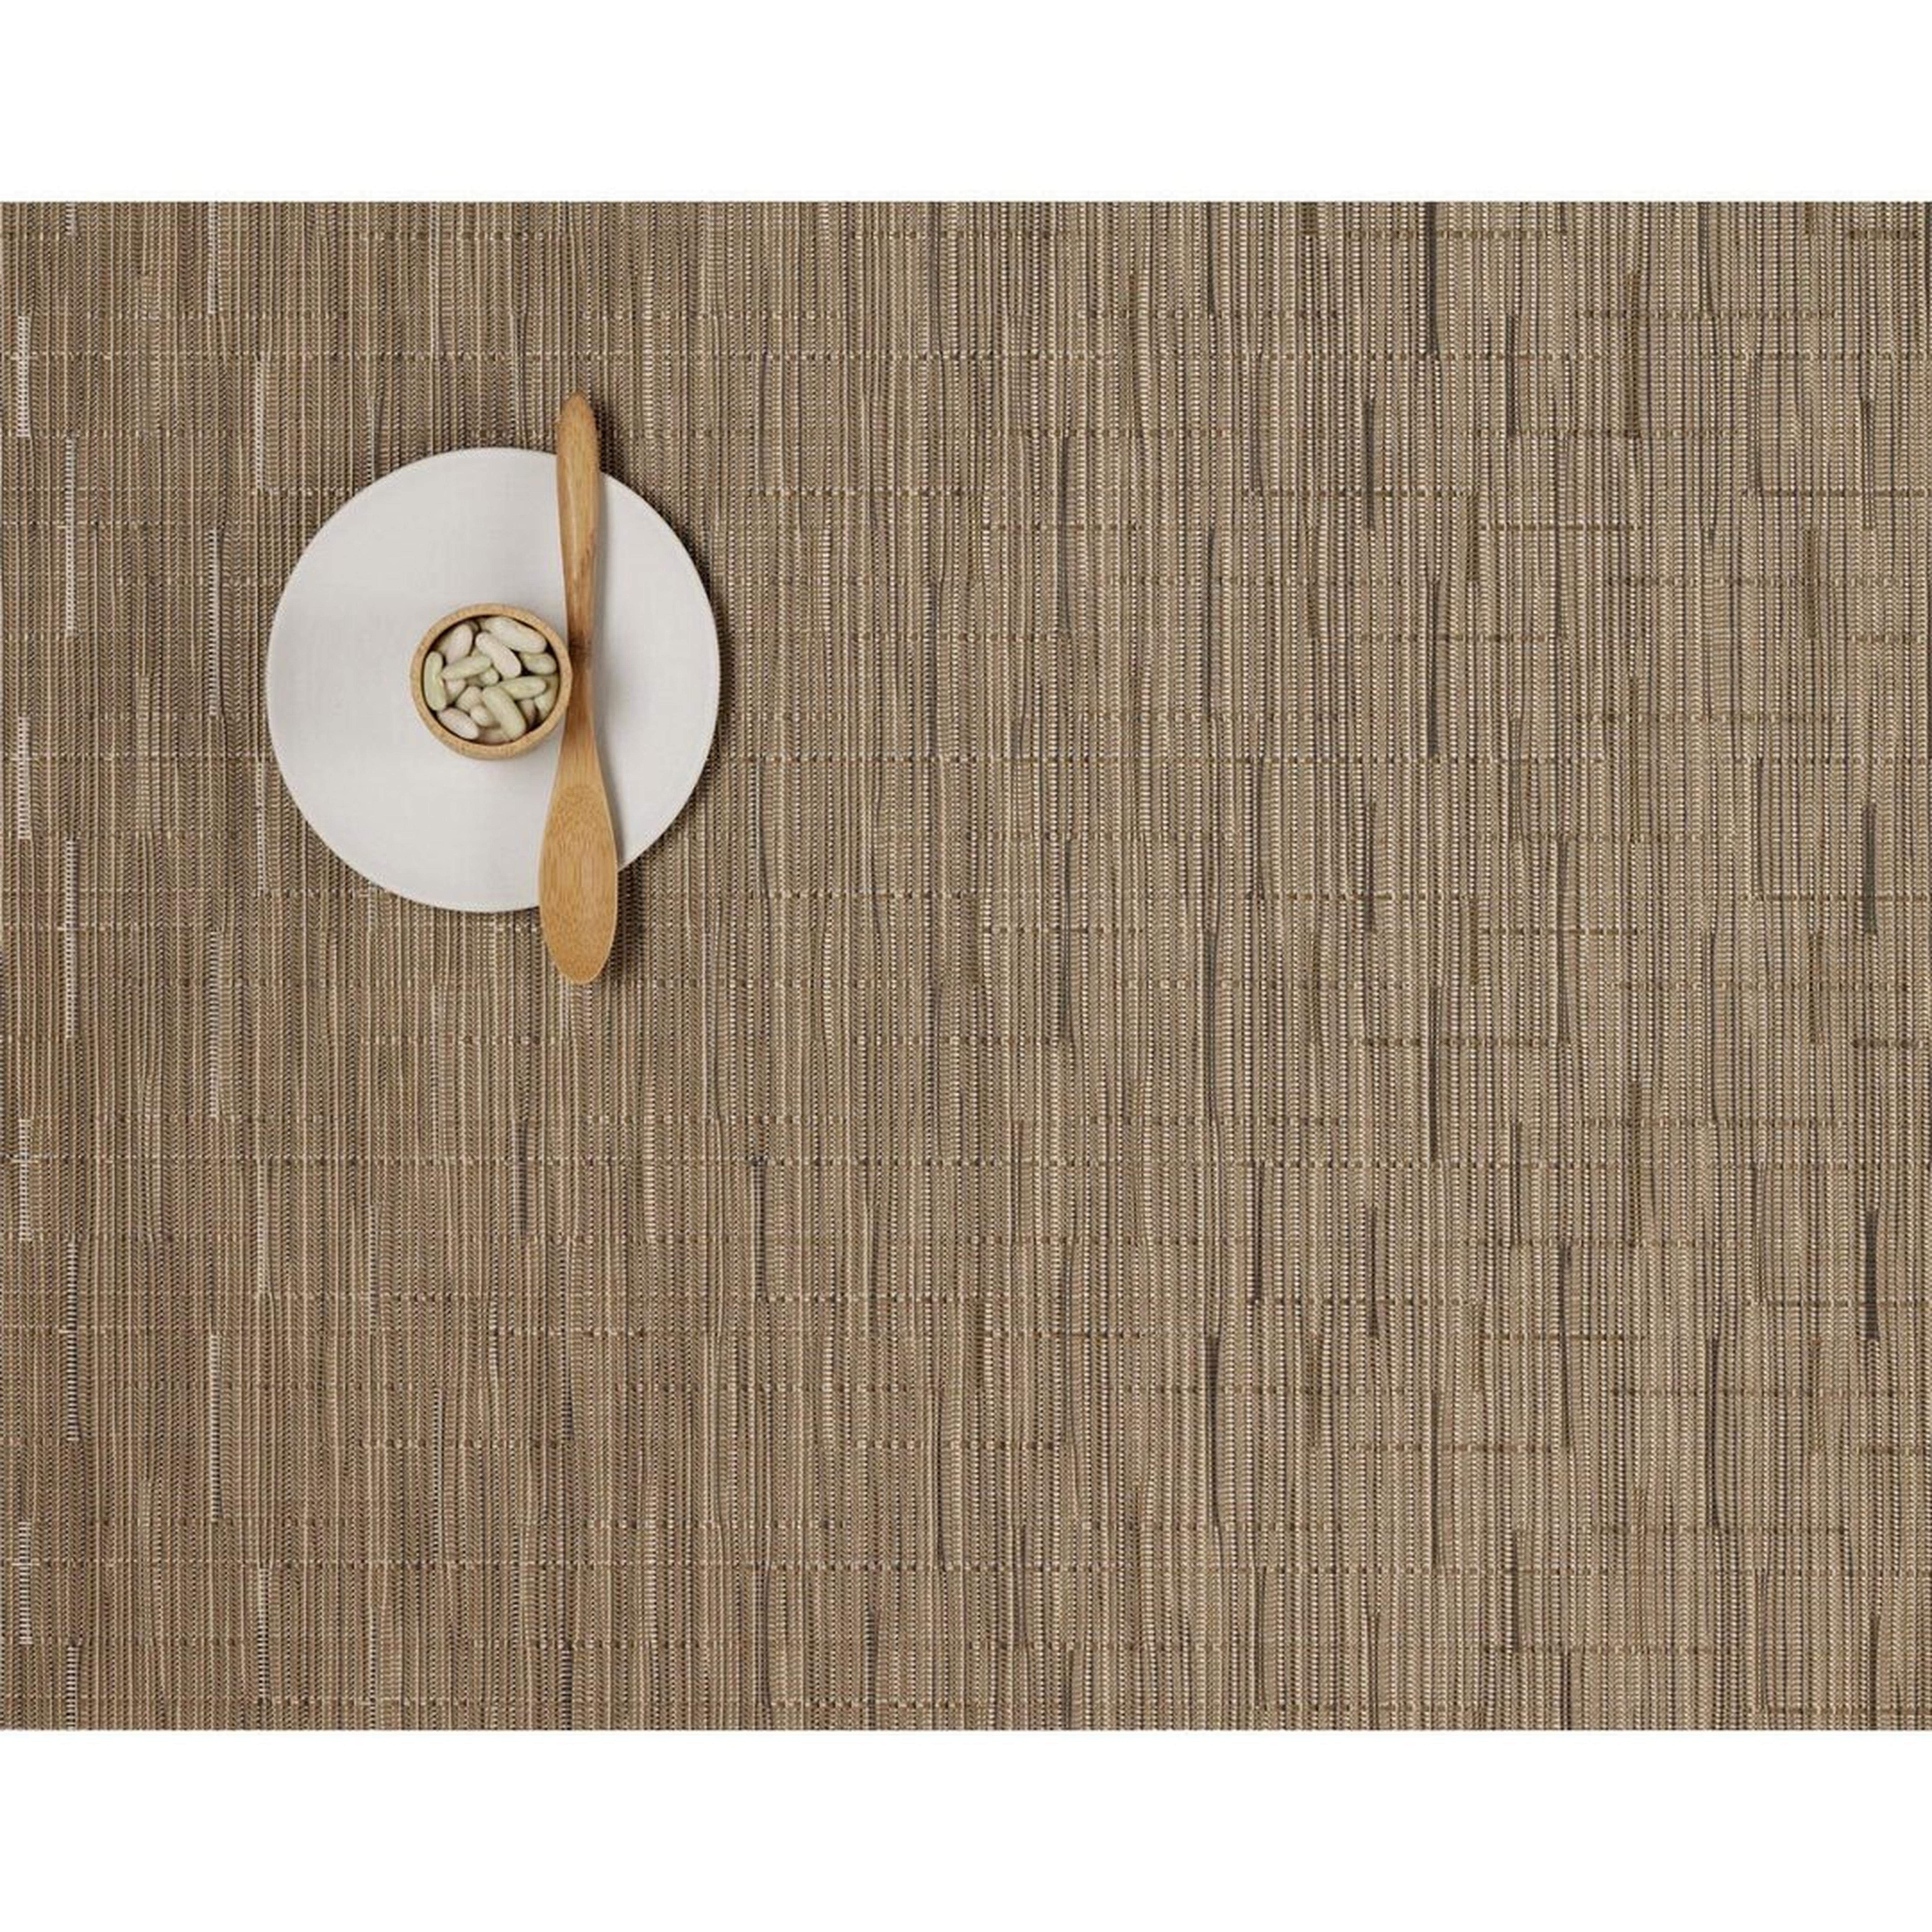 Chilewich Chilewich Easy Care Bamboo Rectangular Placemat - Perigold